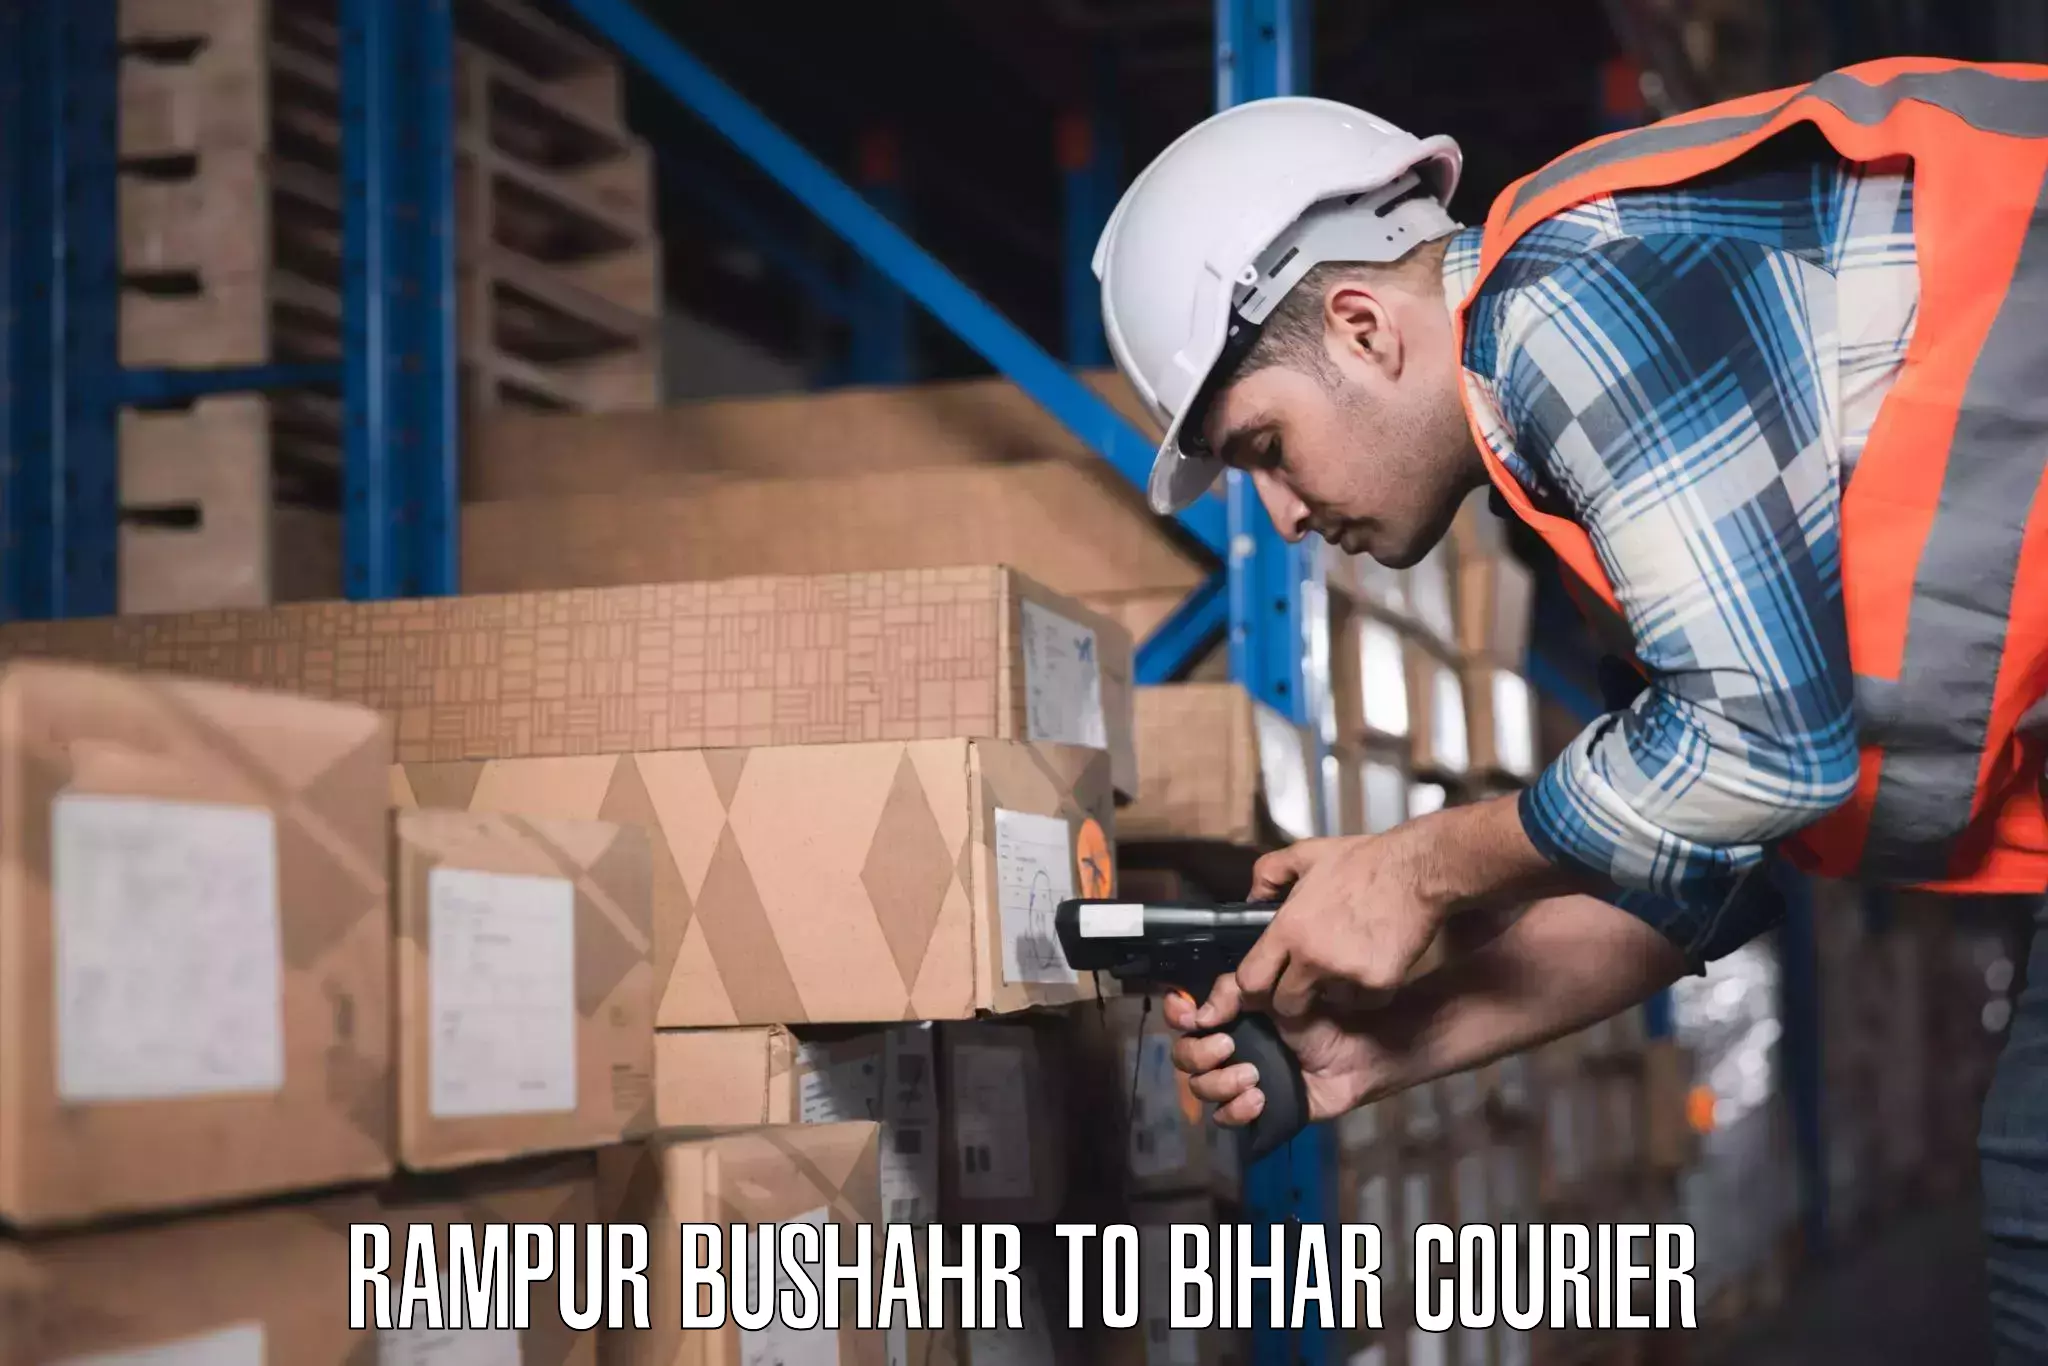 Baggage relocation service Rampur Bushahr to Chainpur